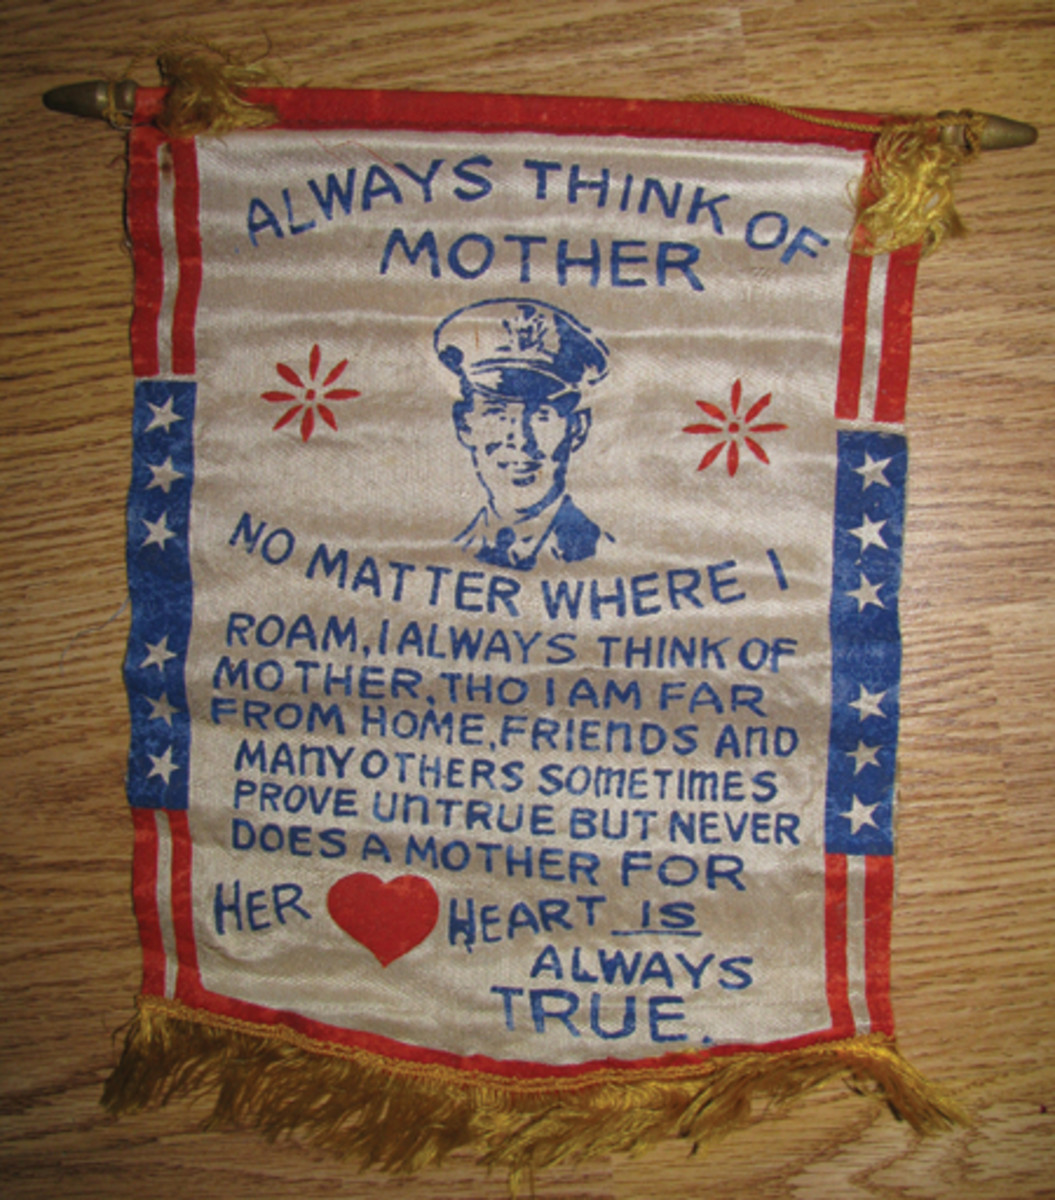  Wall banners, complete with poetry were popular back home, along with handkerchiefs and head scarves.